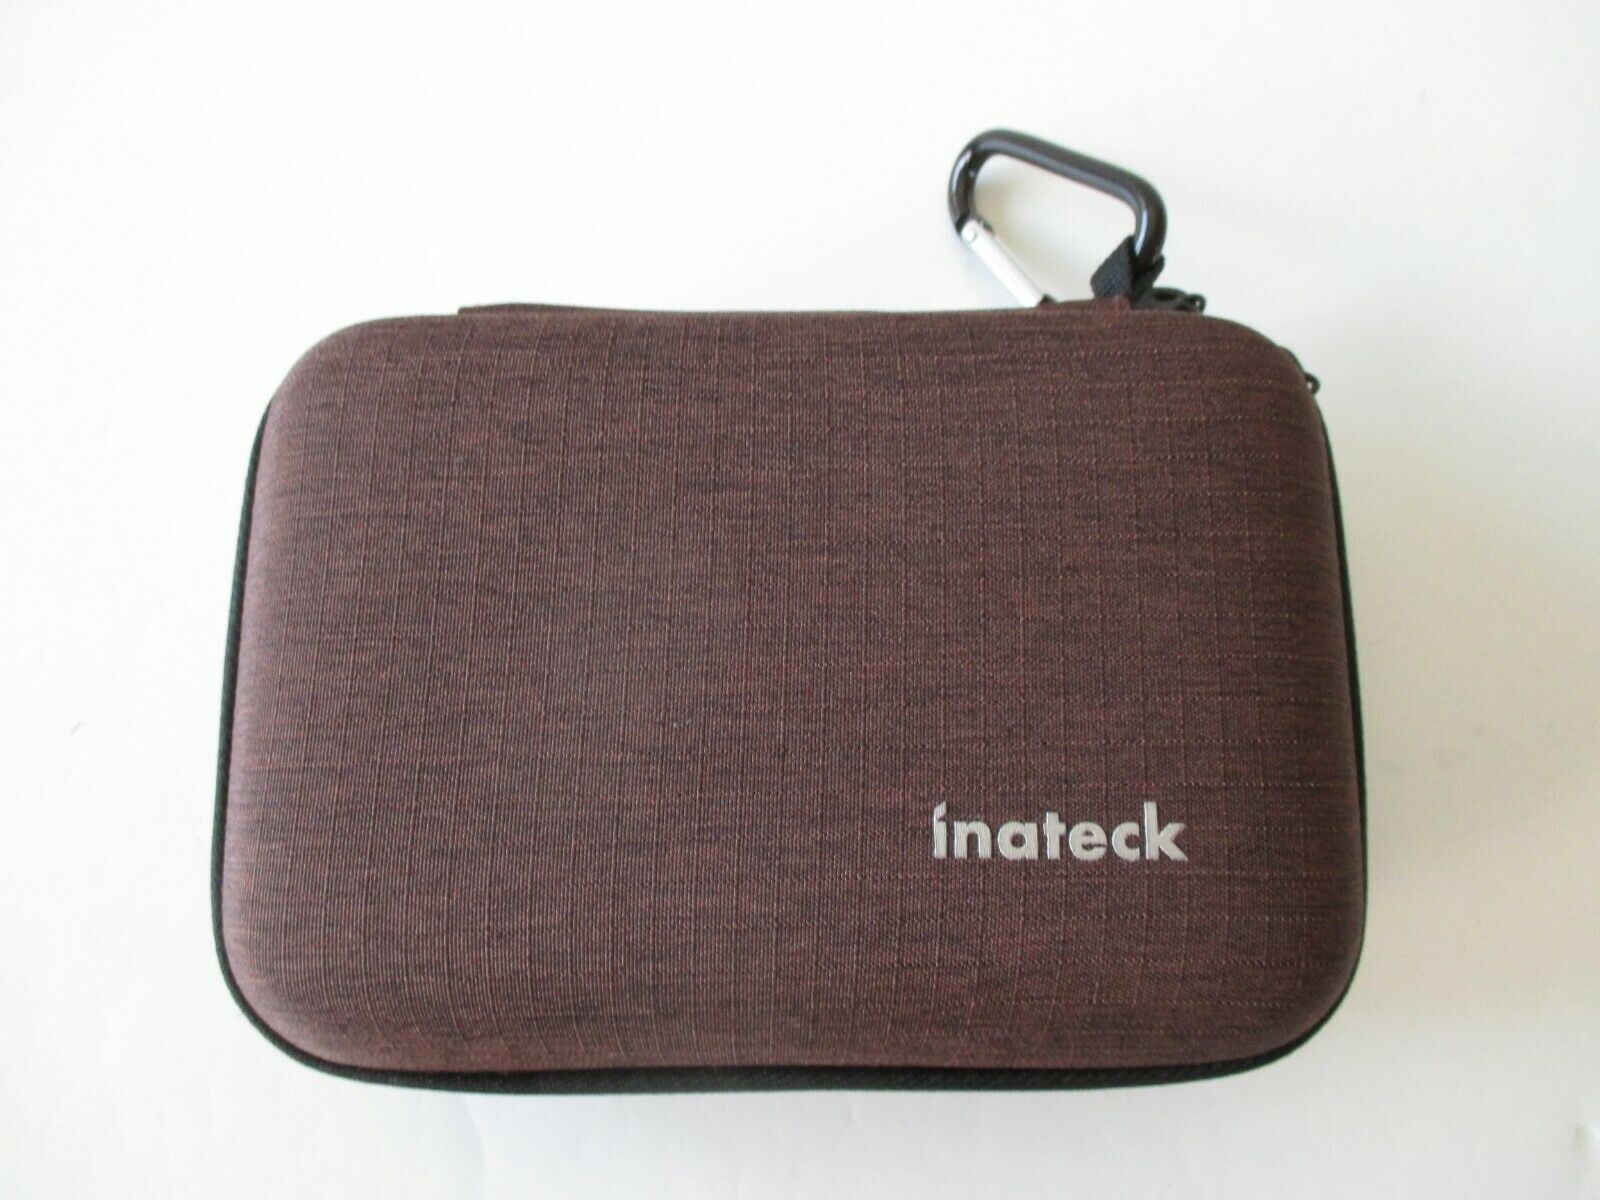 Inateck Protective Carrying Case For 2.5" Hard Drives